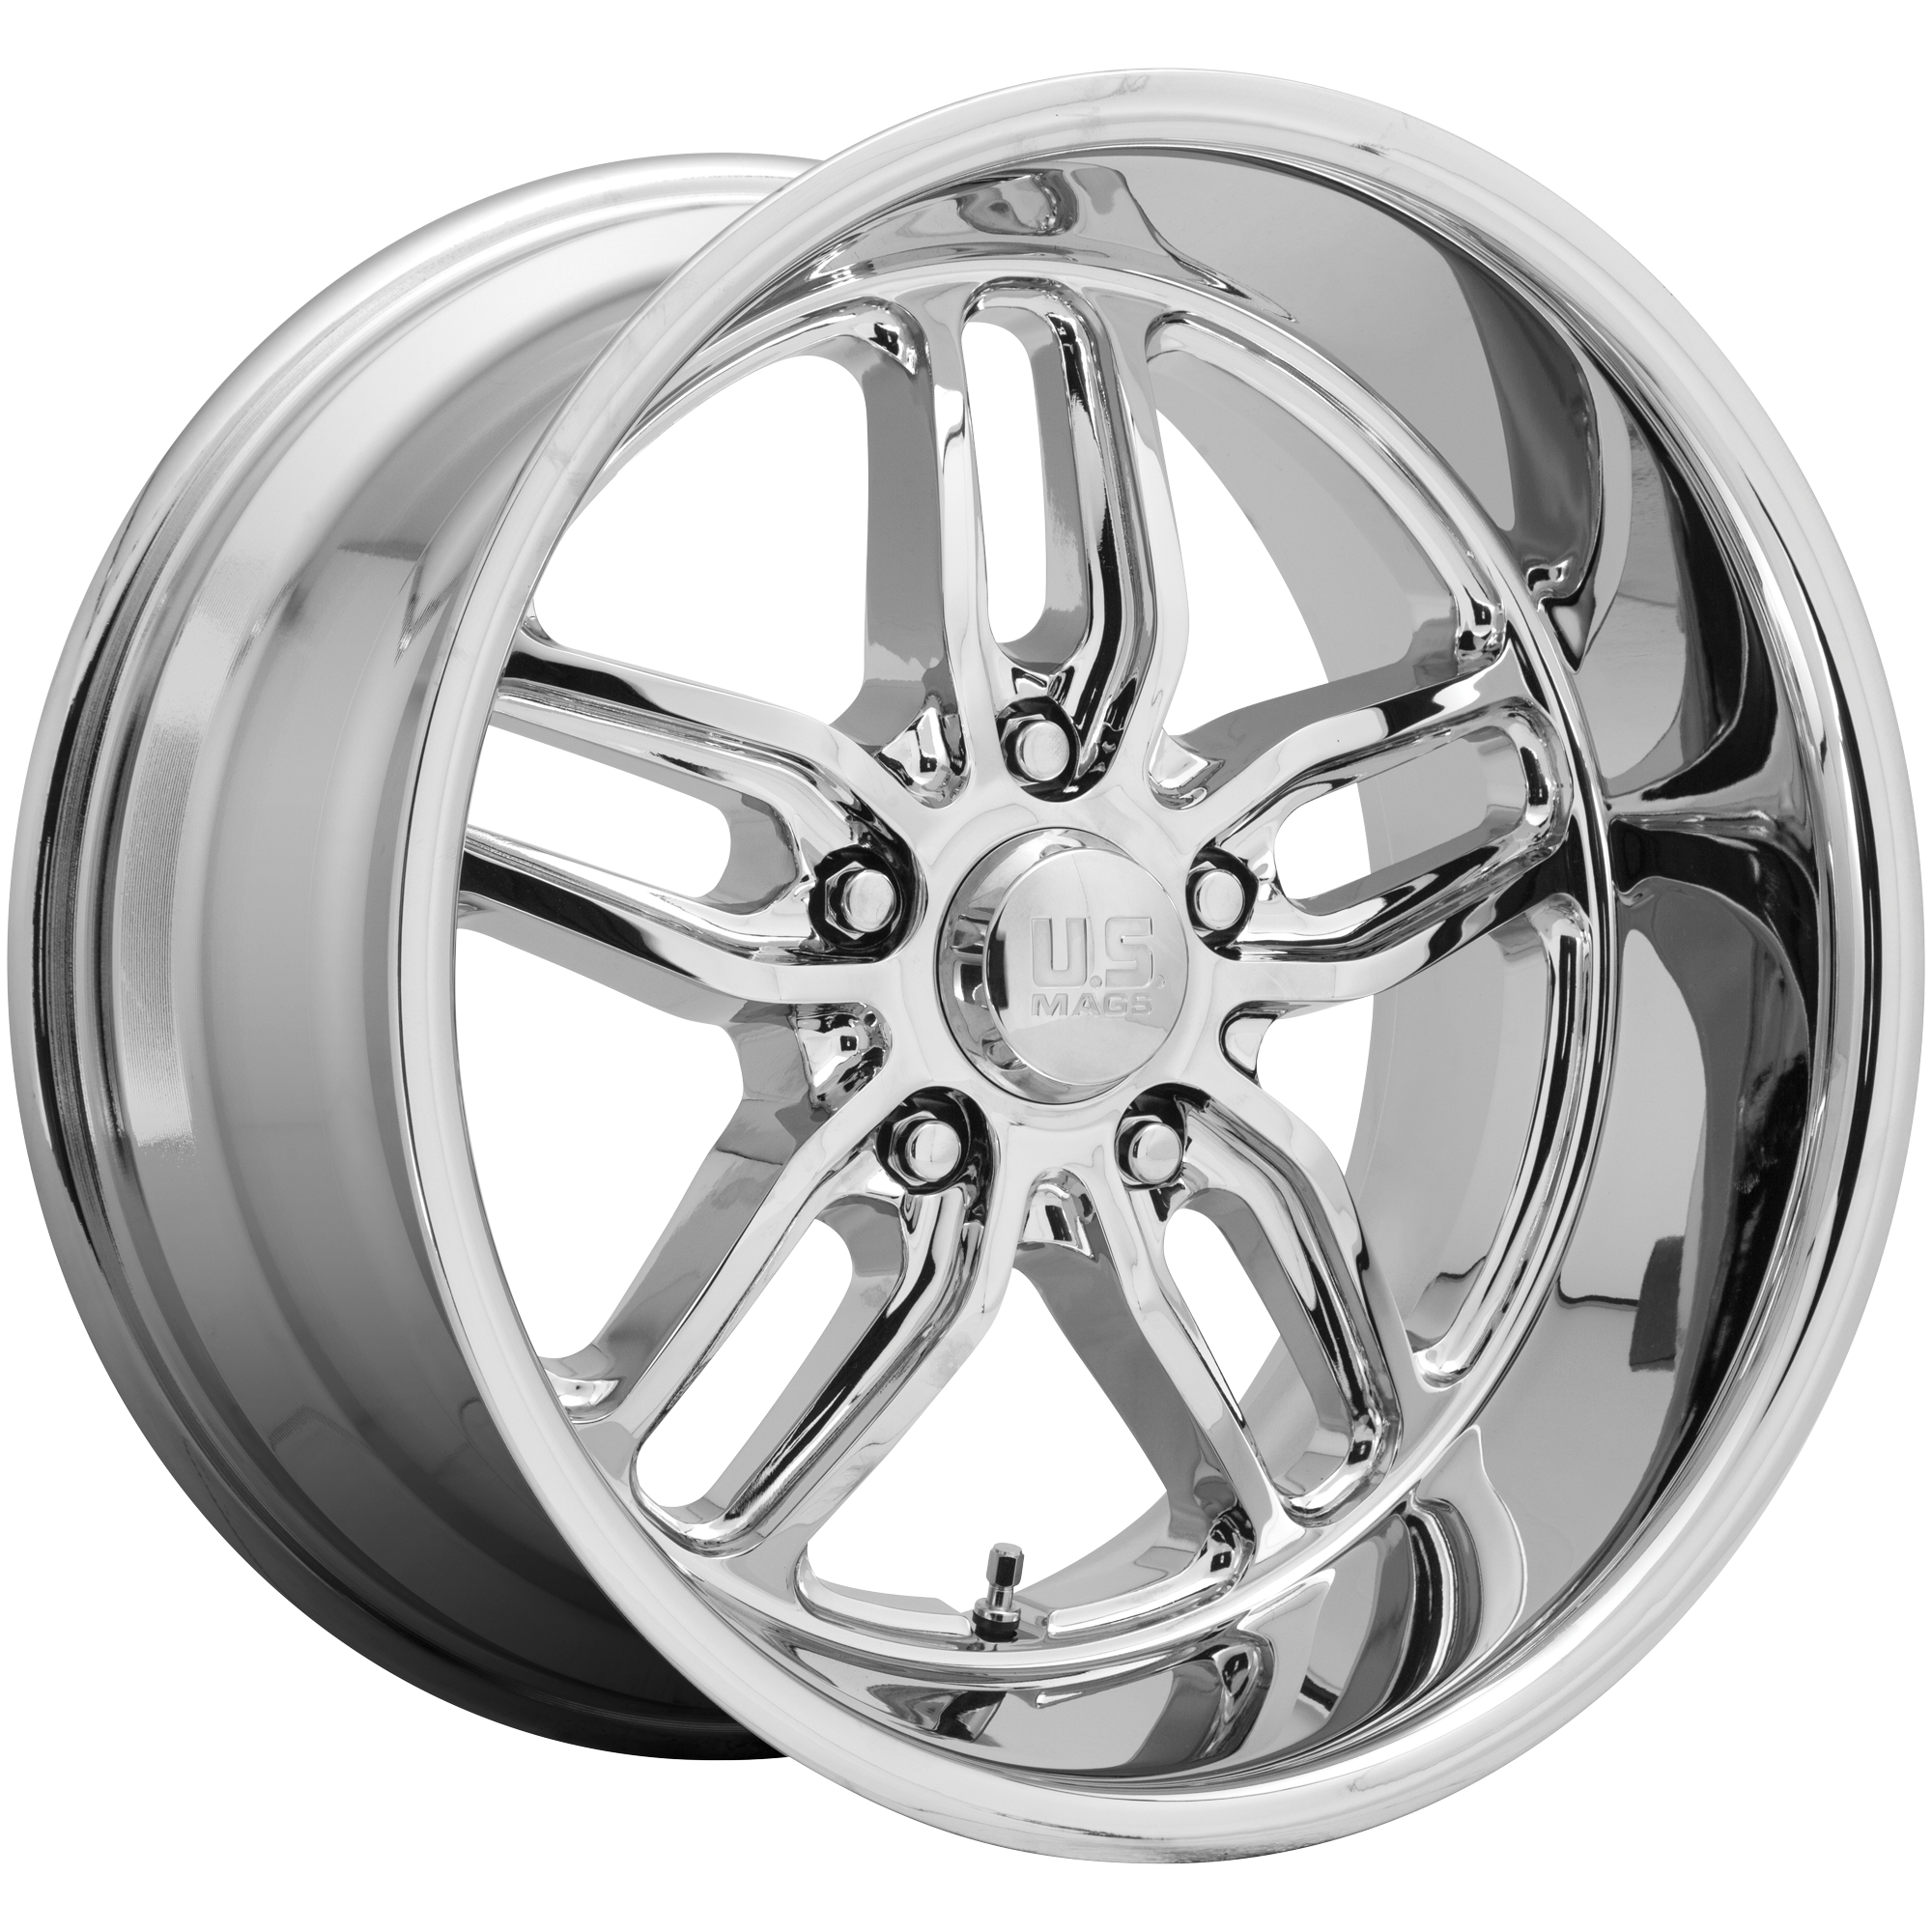 CTEN 18x8 5x127.00 CHROME PLATED (1 mm) - Tires and Engine Performance